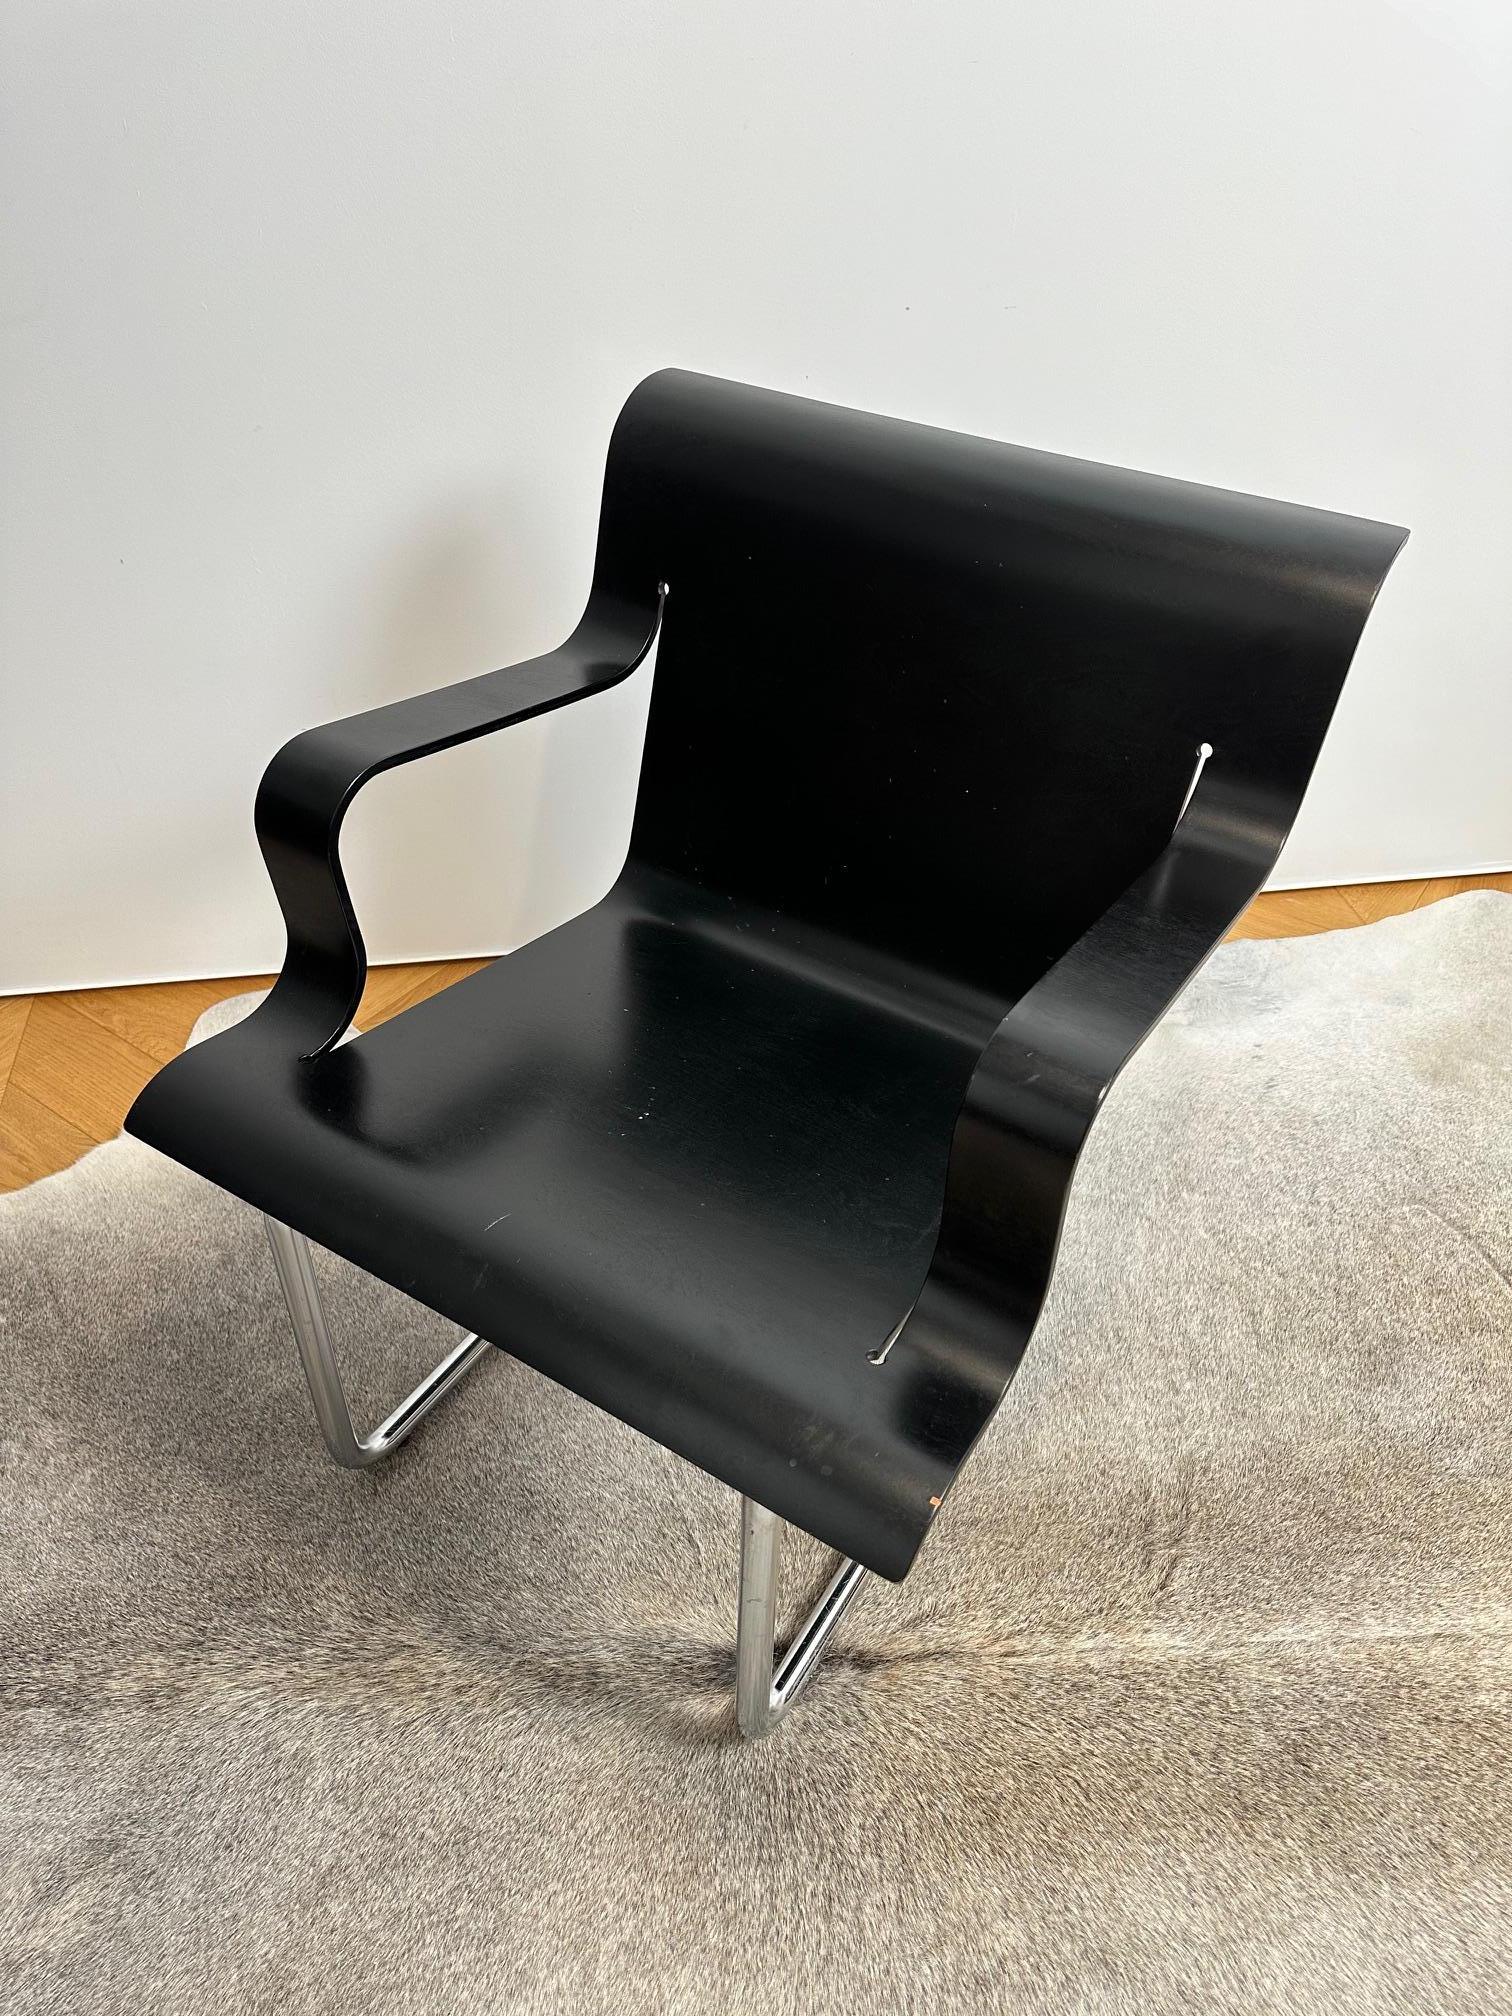 Very hard to find Model 26 armchair is designed by Alvar Aalto for Artek with frame in steel tube, painted matt black and with seat form pressed birch plywood, lacquered in black.

Aalto designed Lounge Chair 26 in 1932, but only a prototype was